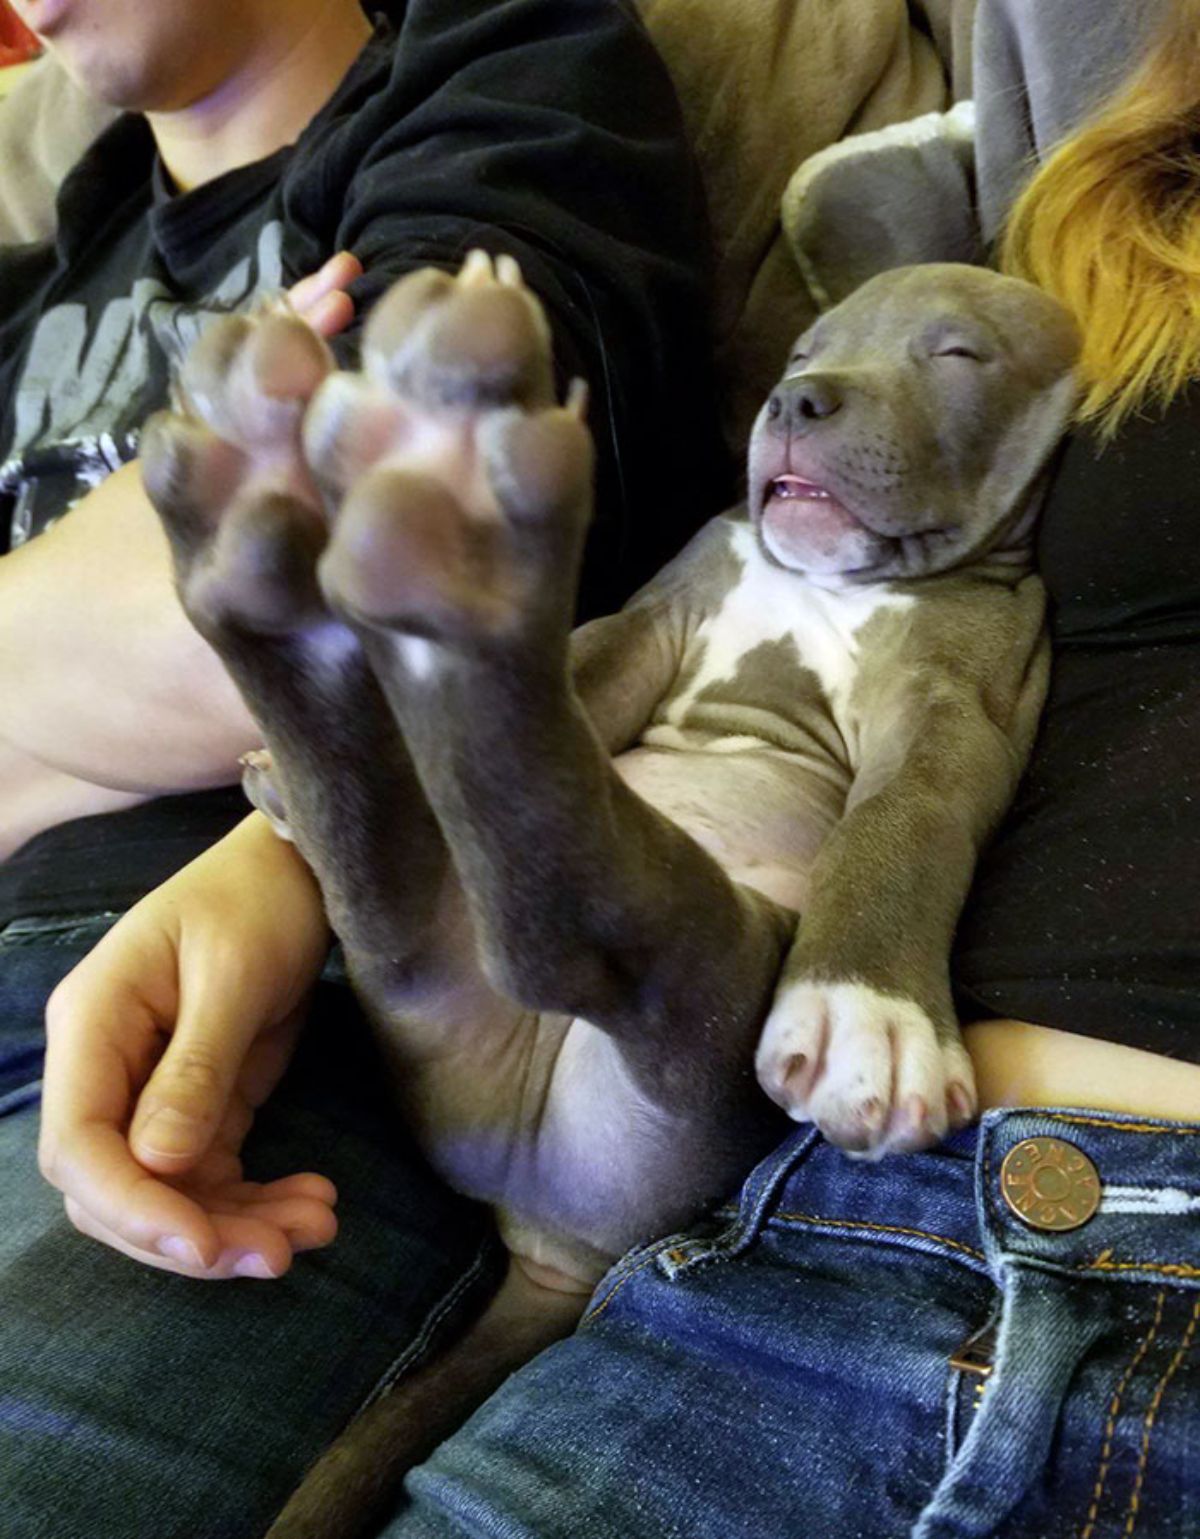 grey and white pitbull puppy sleeping on someone's lap with the back legs stretched out